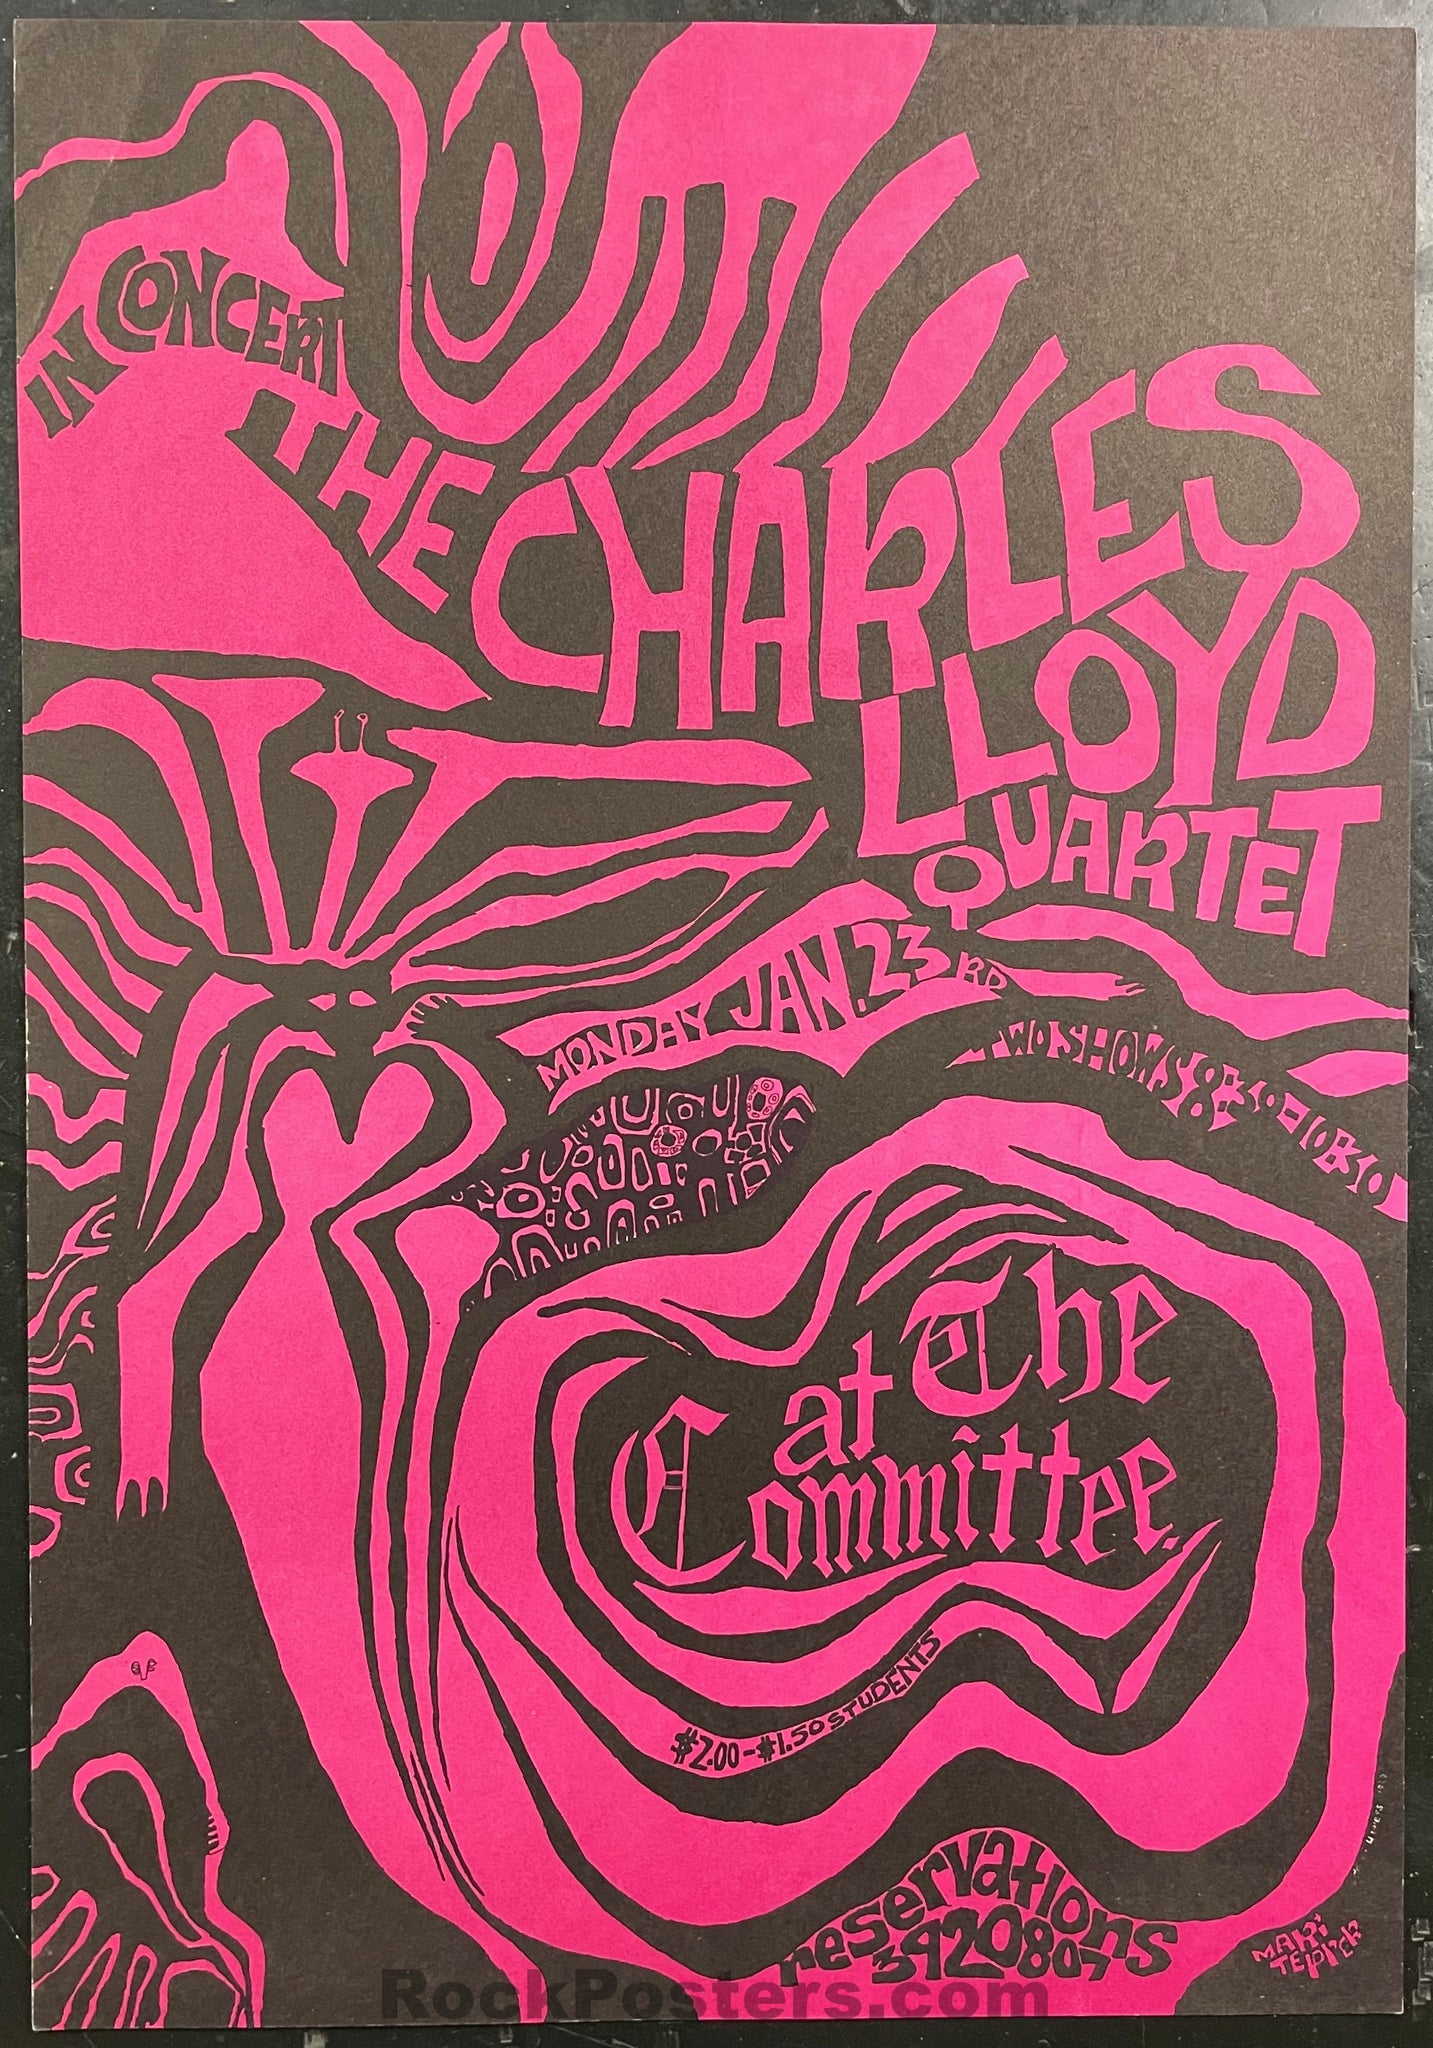 AUCTION - Charles Lloyd - Mari Tepper - 1967 Poster - Committee Theater - Excellent